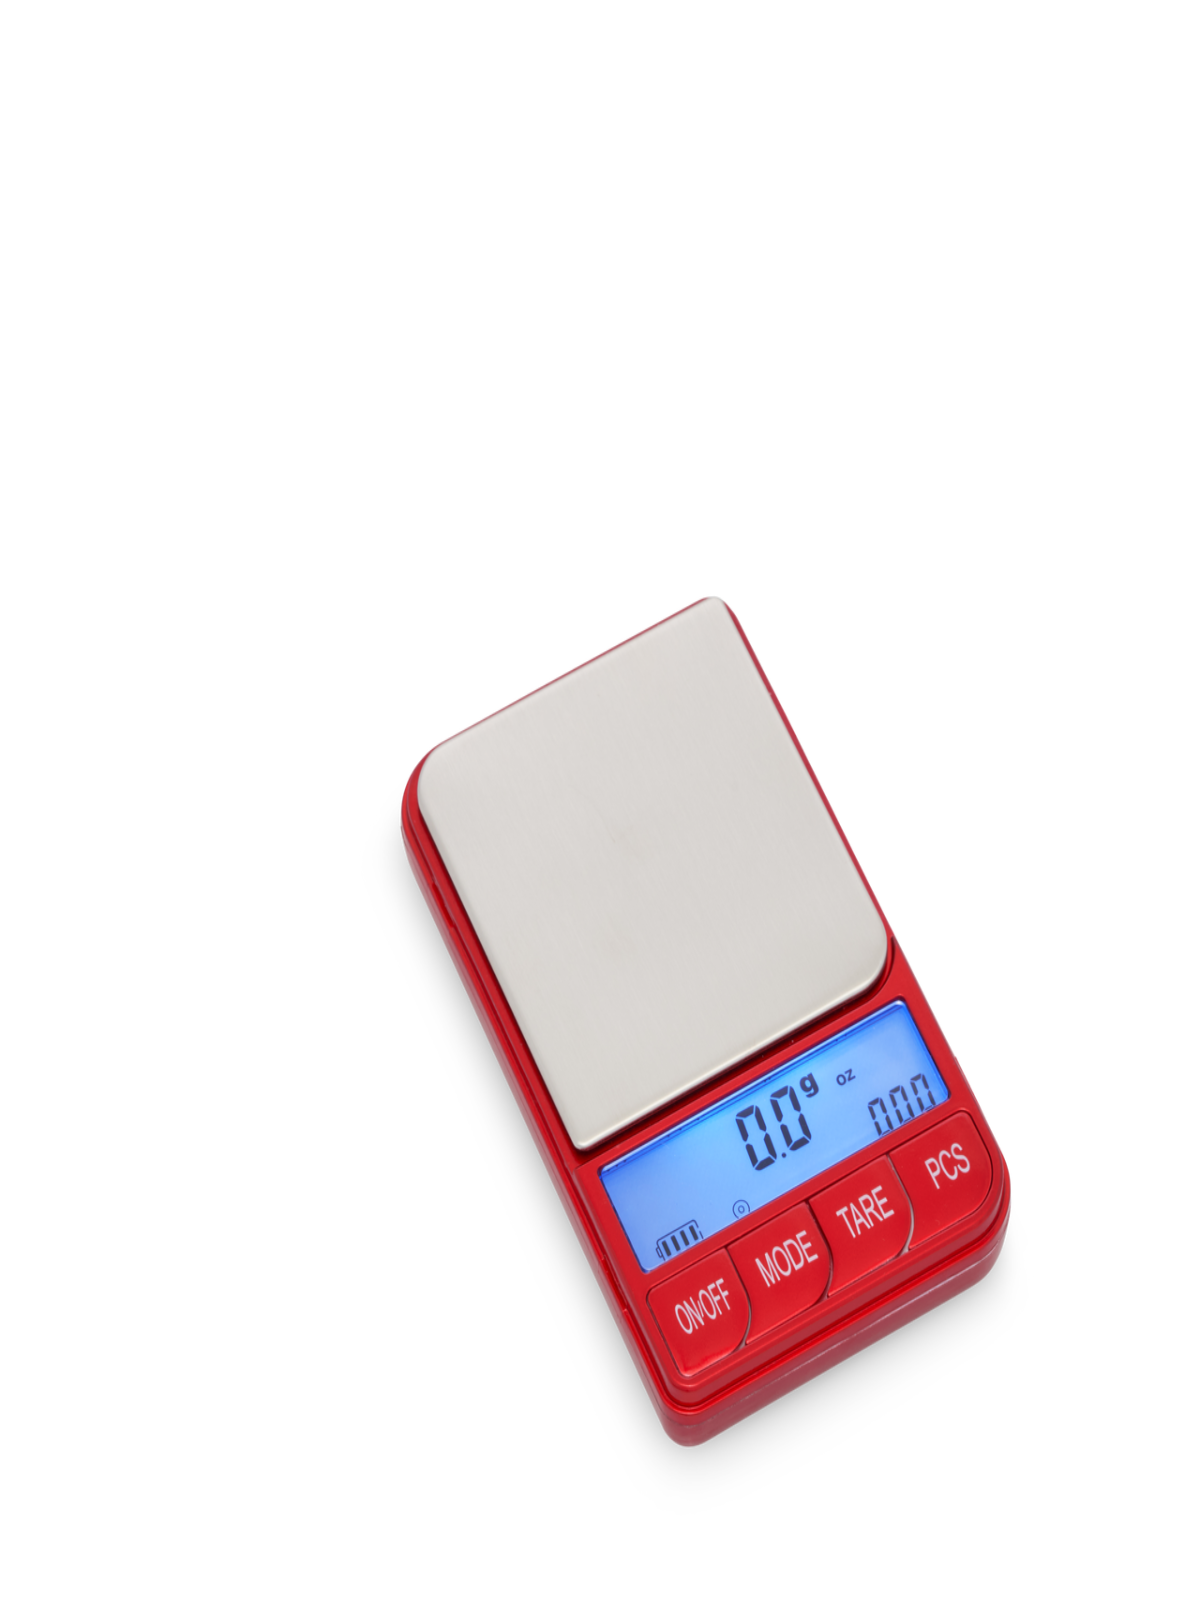 American Weigh Scales Lb-1000 Compact Bowl Scale